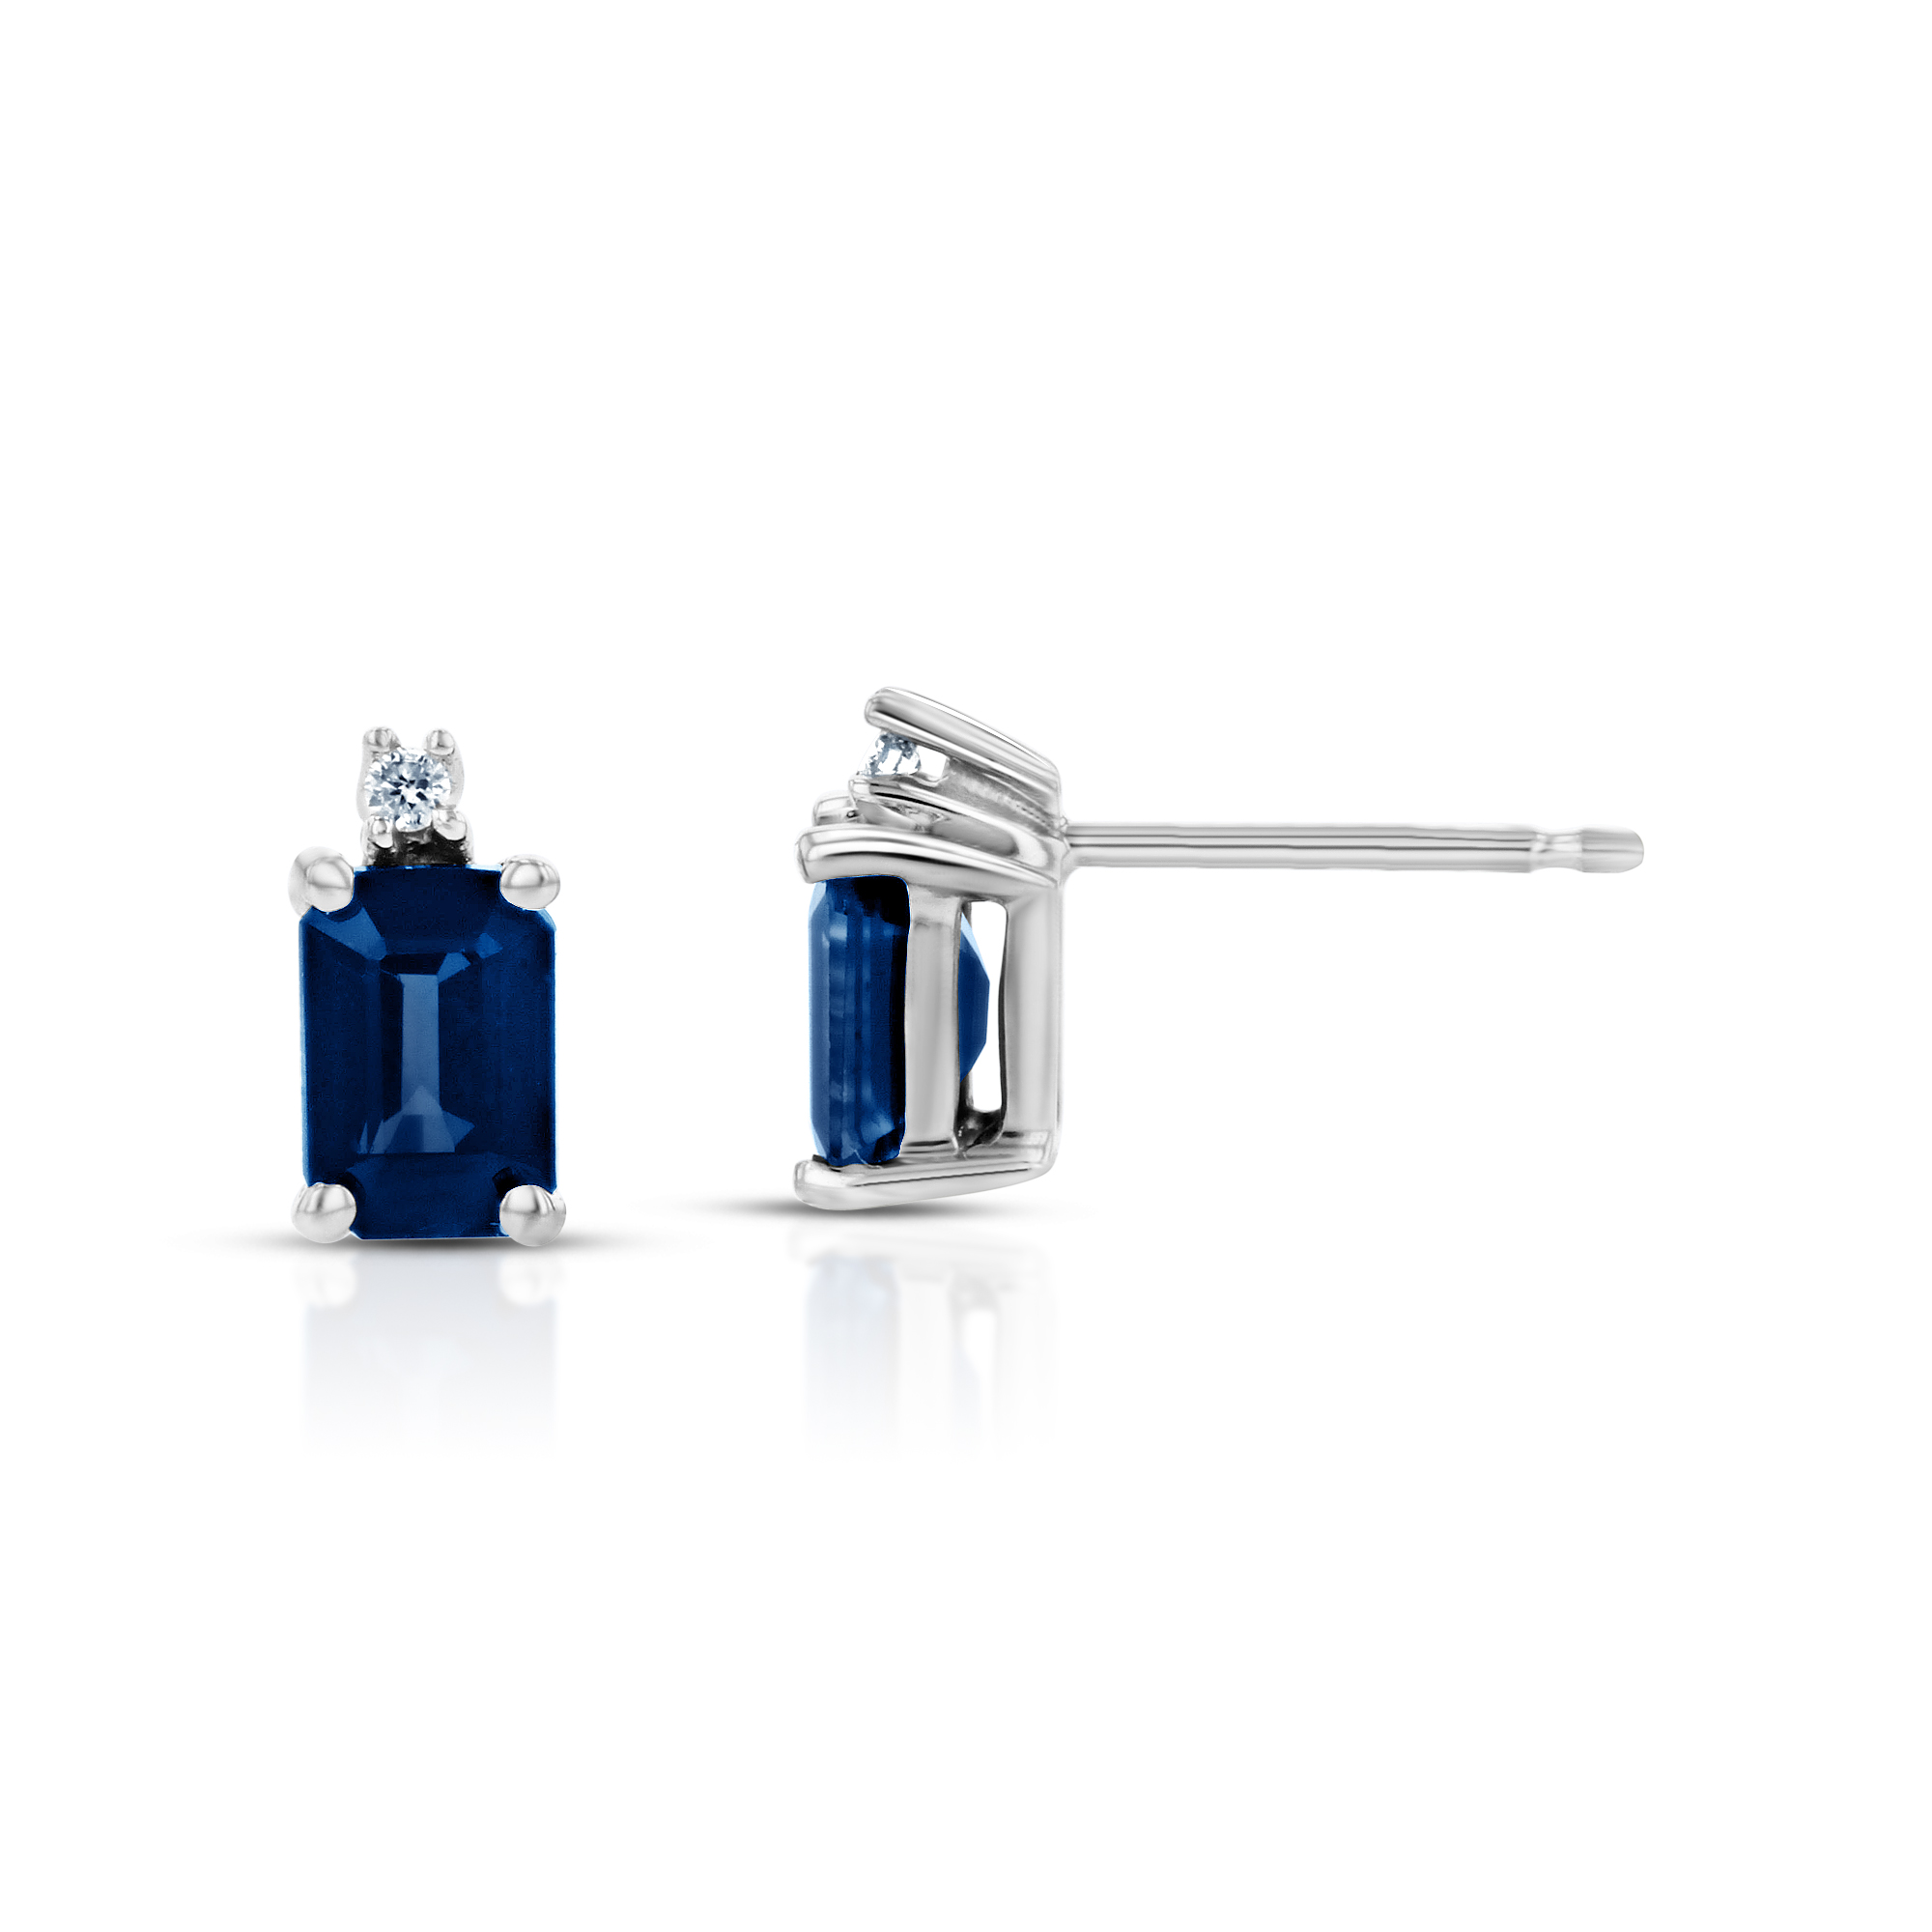 View 0.02ctw Round Diamonds and Sapphire Earrings in 14k White Gold